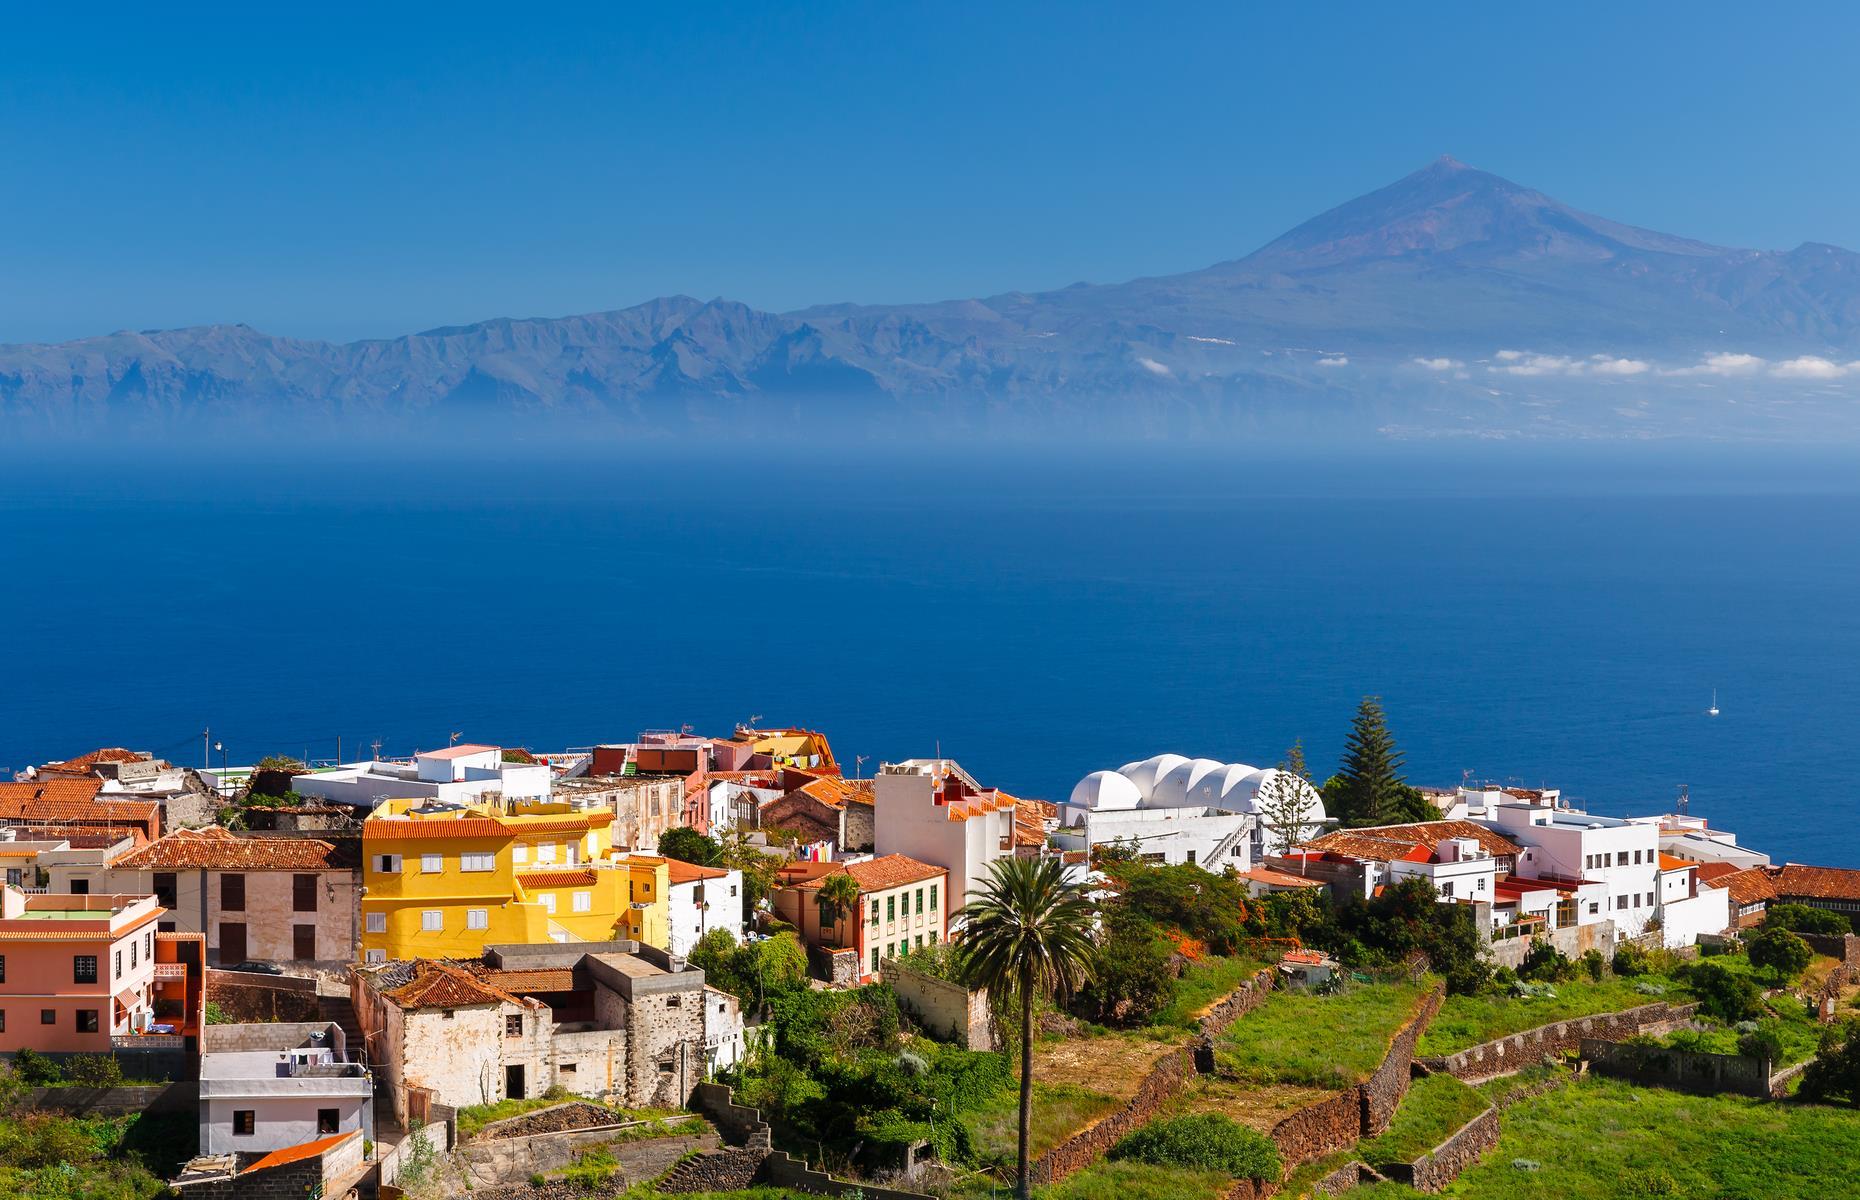 <p>Mount Teide is one of Europe's most easily accessible volcanoes as it's located on the volcanic island of Tenerife, one of <a href="https://www.loveexploring.com/news/77375/family-fun-winter-sun-which-canary-island-holiday-is-for-you">Spain’s Canary Islands</a>. Despite a seismic swarm (a series of mini earthquakes) in 2016 and 2017, scientists say they aren’t concerned about an imminent eruption (low level seismic activity is very normal).</p>